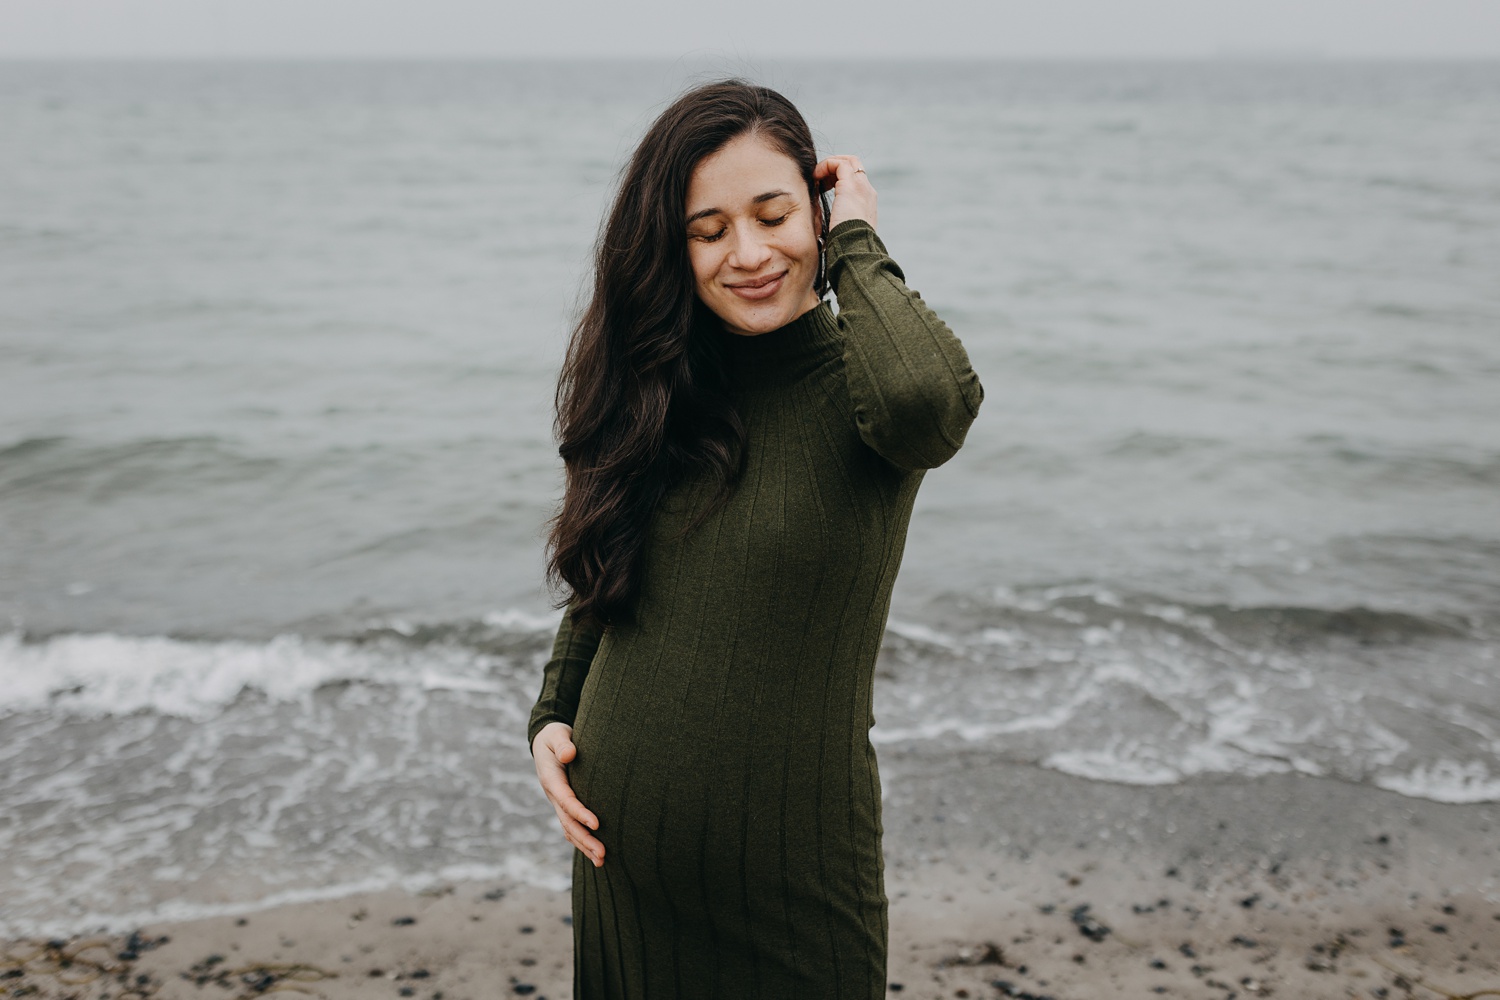 Pregnant woman posing on Amager Strand beach with ocean in background